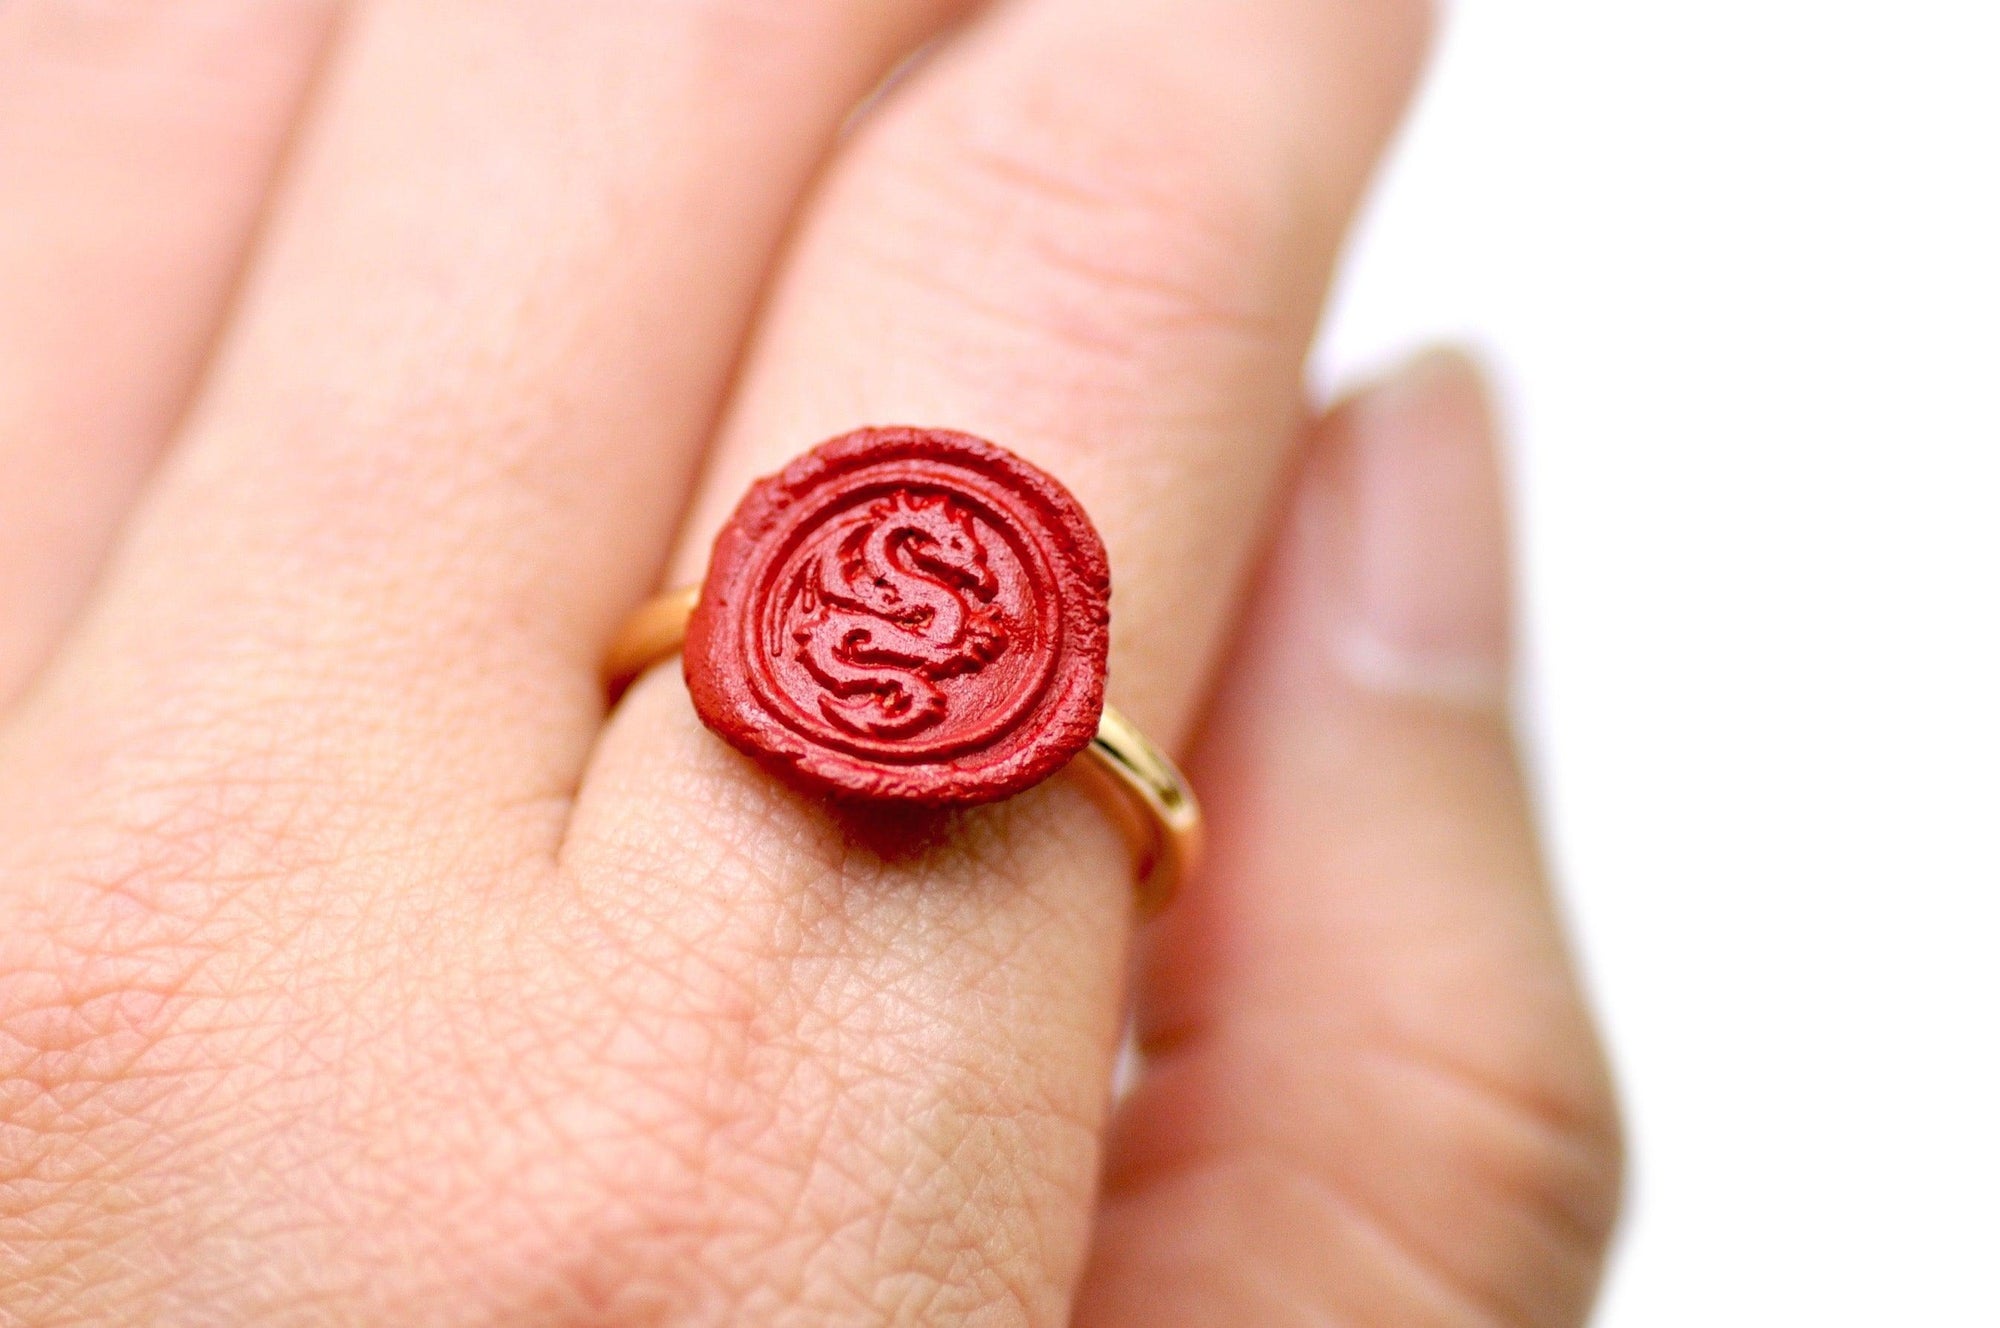 OOAK Dragon Wax Seal Ring - Backtozero B20 - Dragon, Handmade, Mythical Creatures, OOAK, Red, ring, Rose Red, size 7